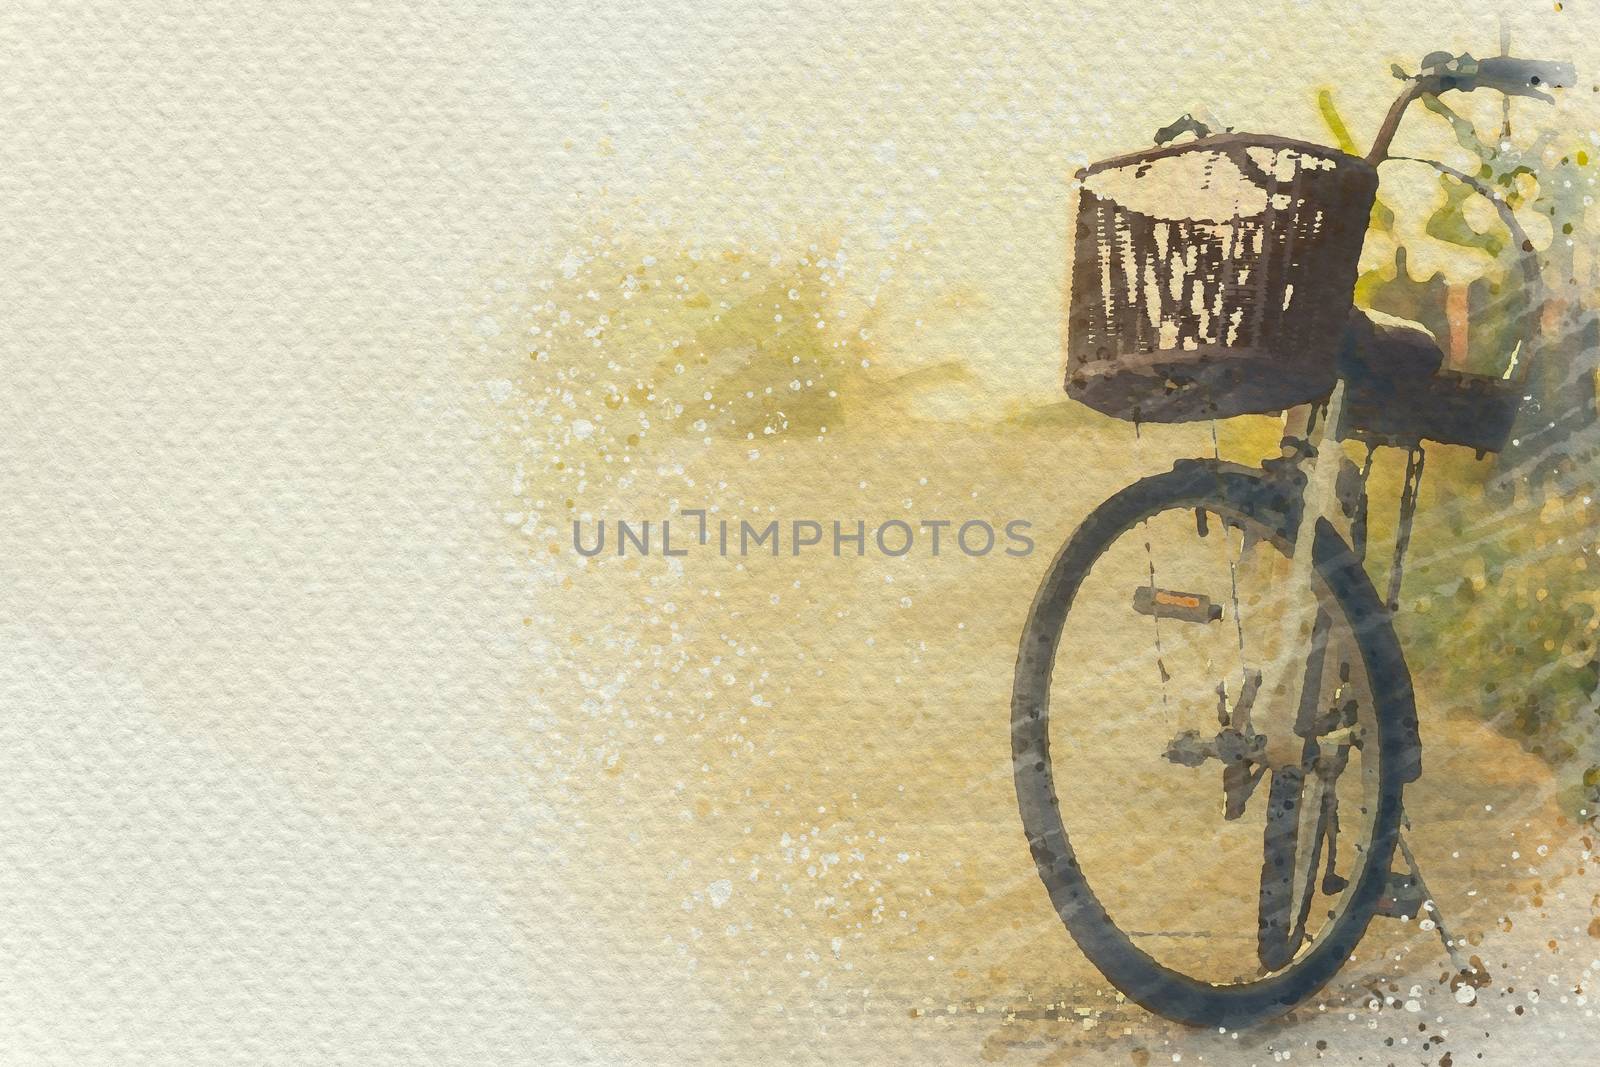 Bicycle parked on the wayside. Digital watercolor painting effect. Copy space for text.